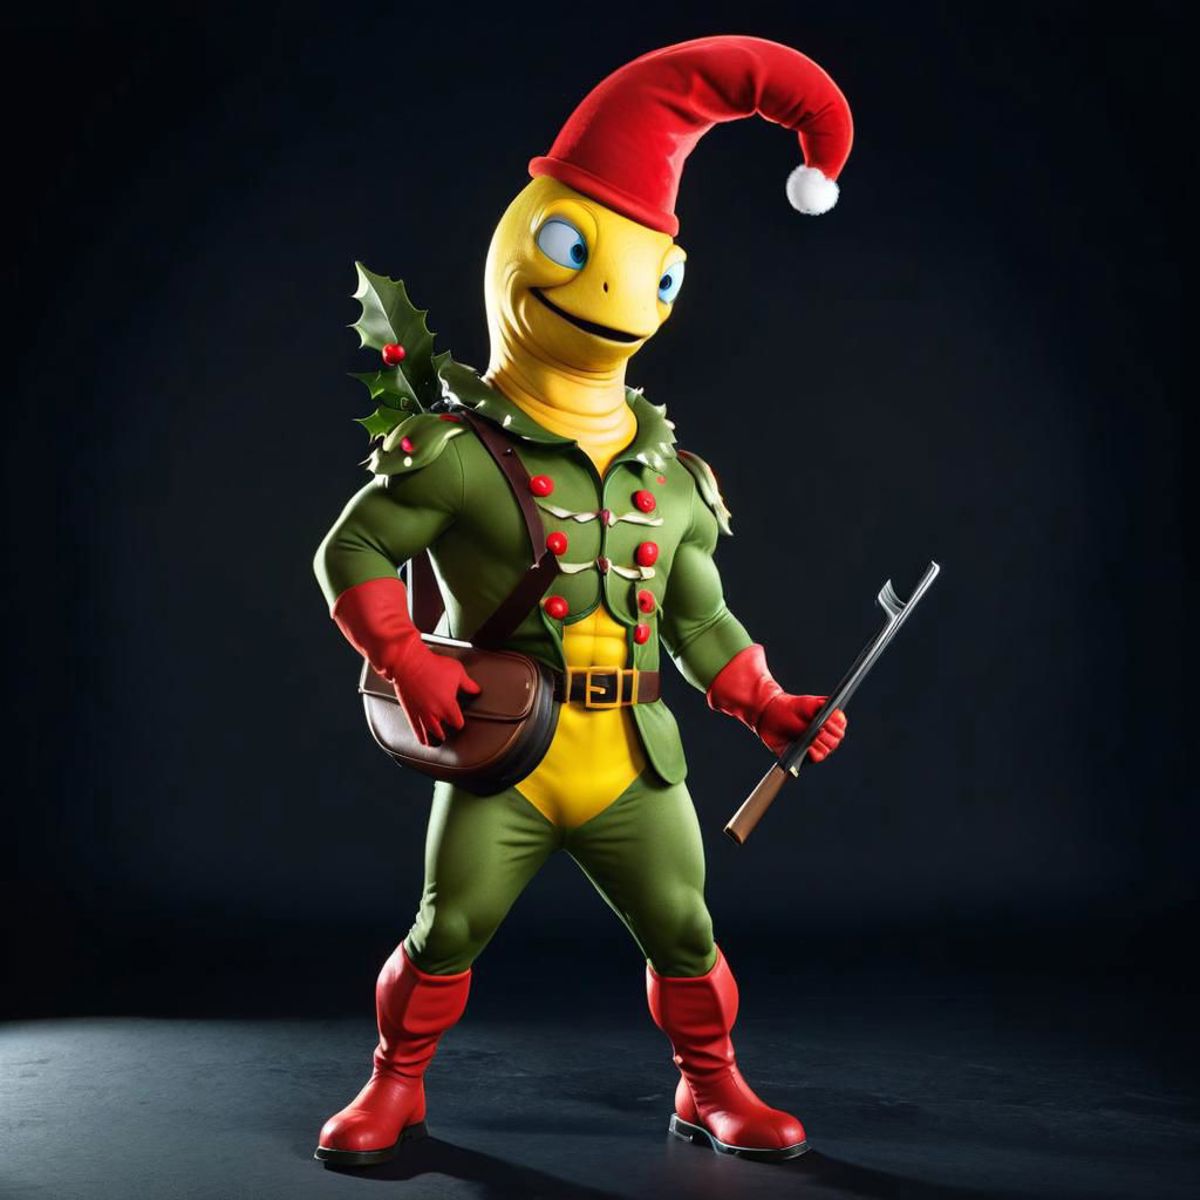 A Christmas-themed toy soldier in a green and red suit.